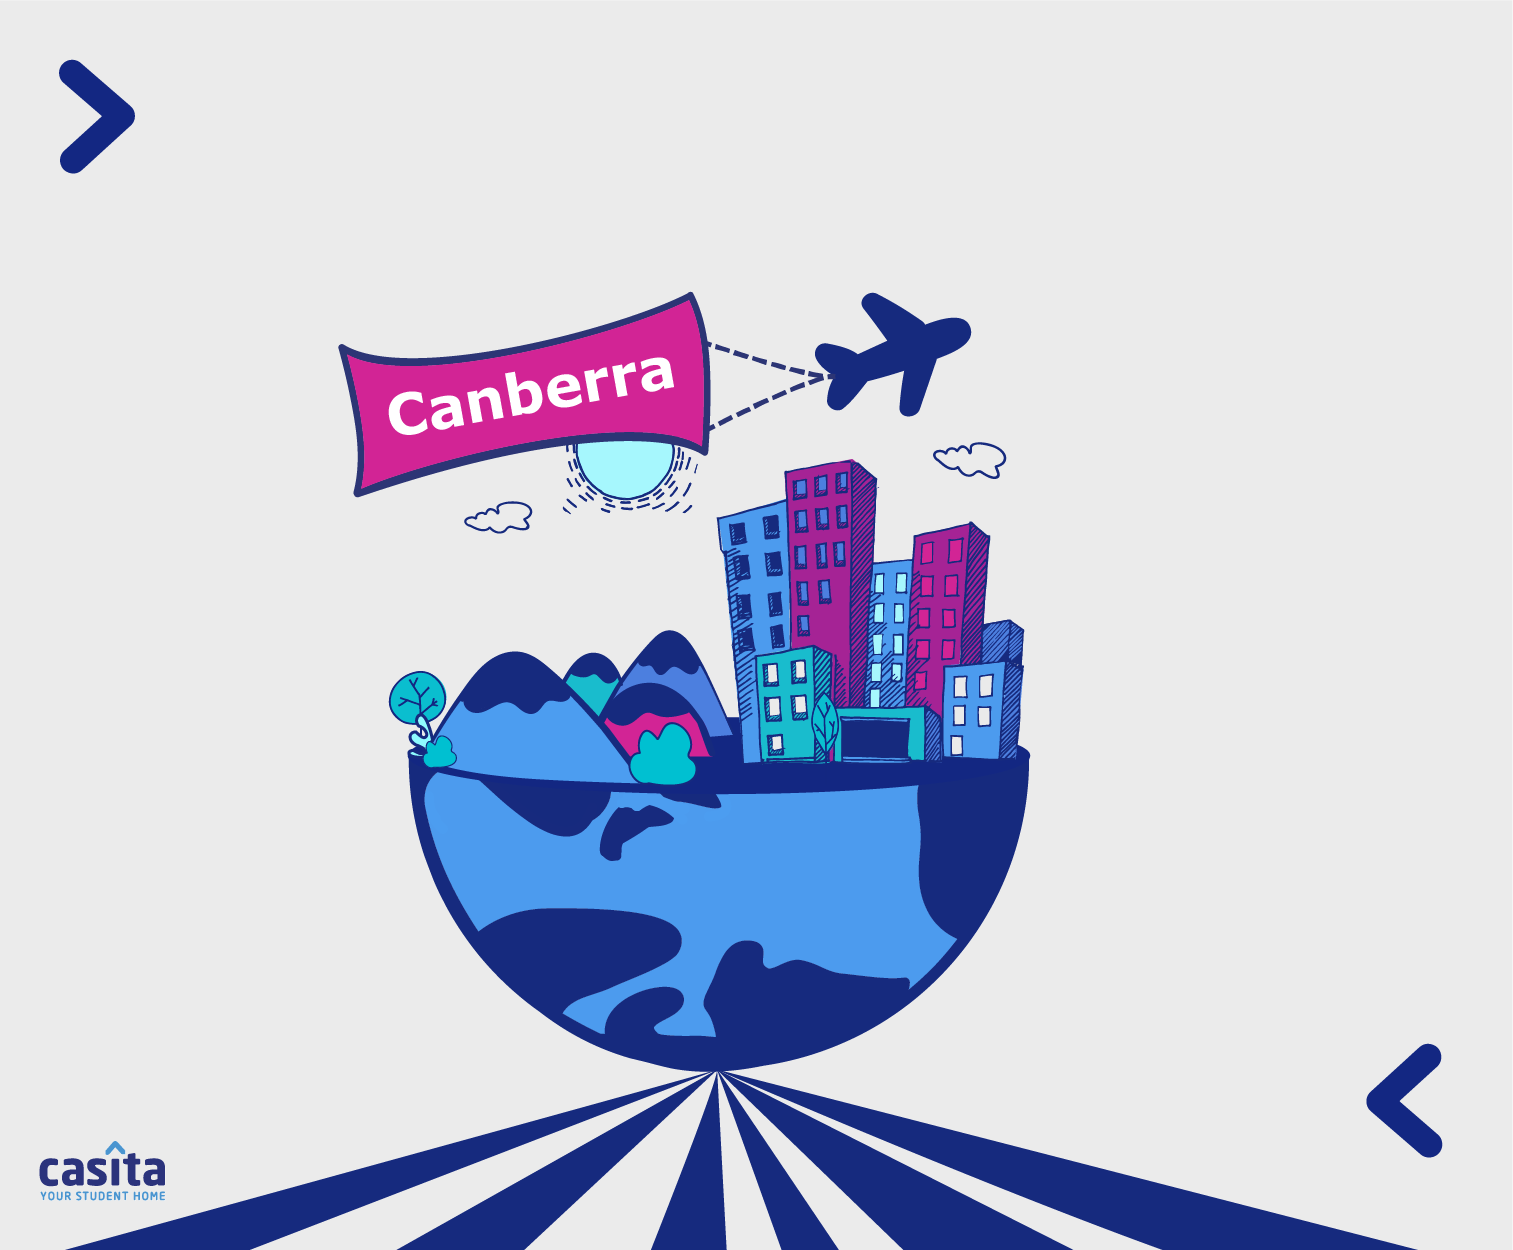 Why Book a Student Housing in Canberra?